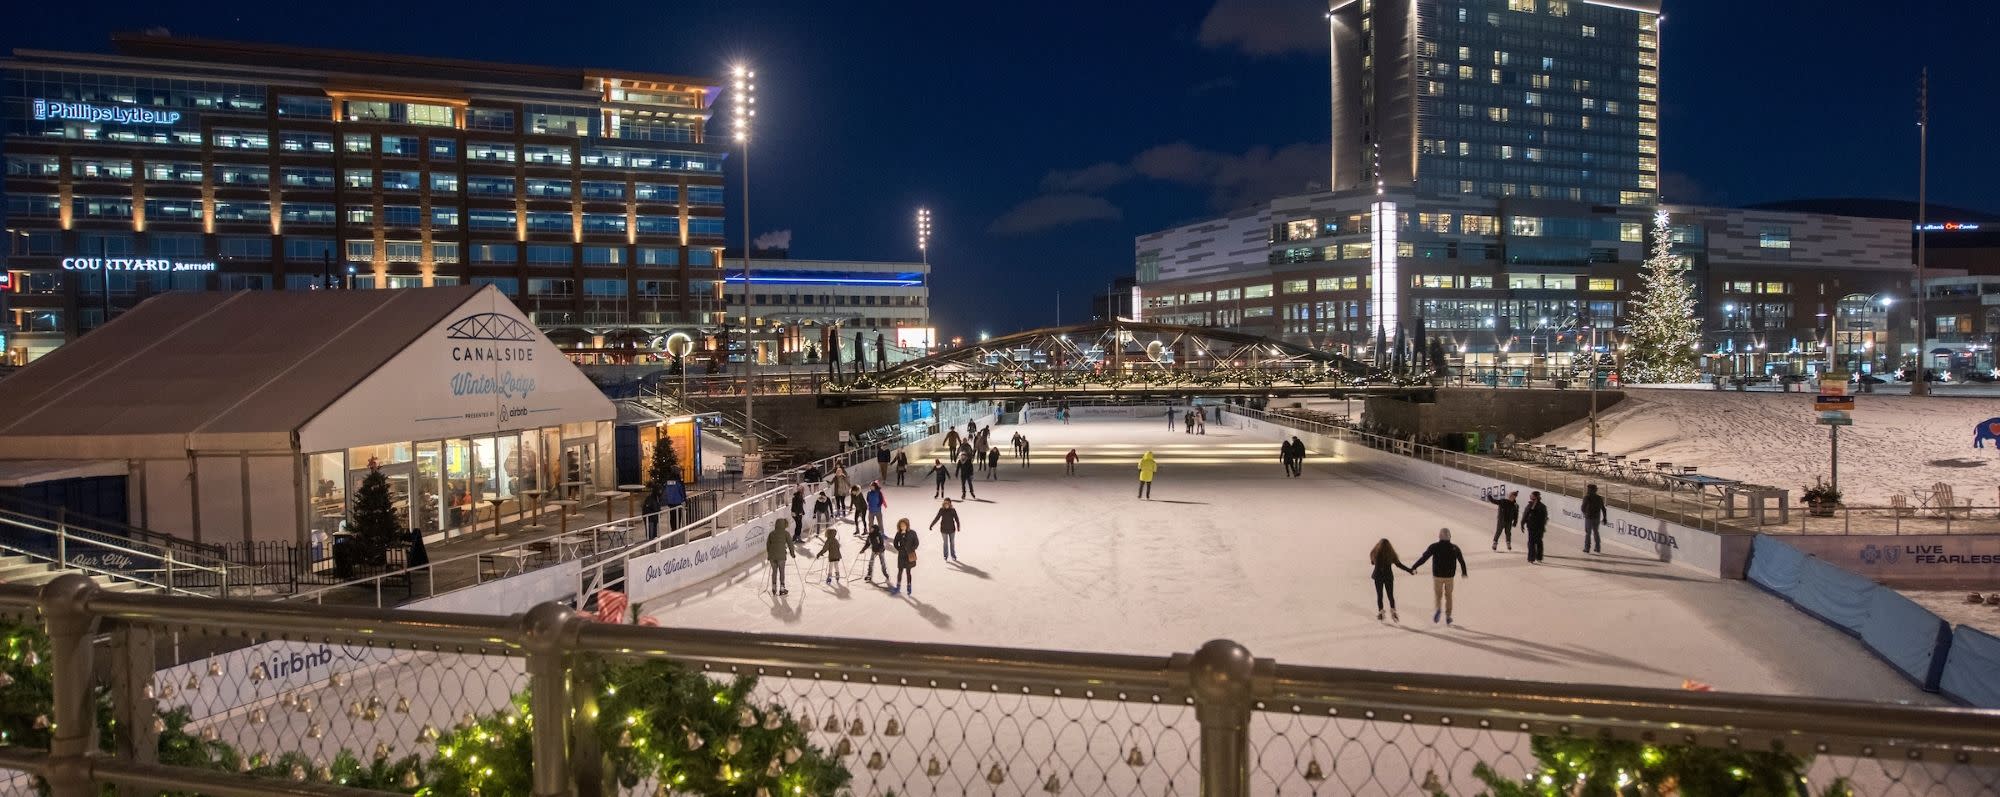 Skaters on the Ice at Canalside in Buffalo